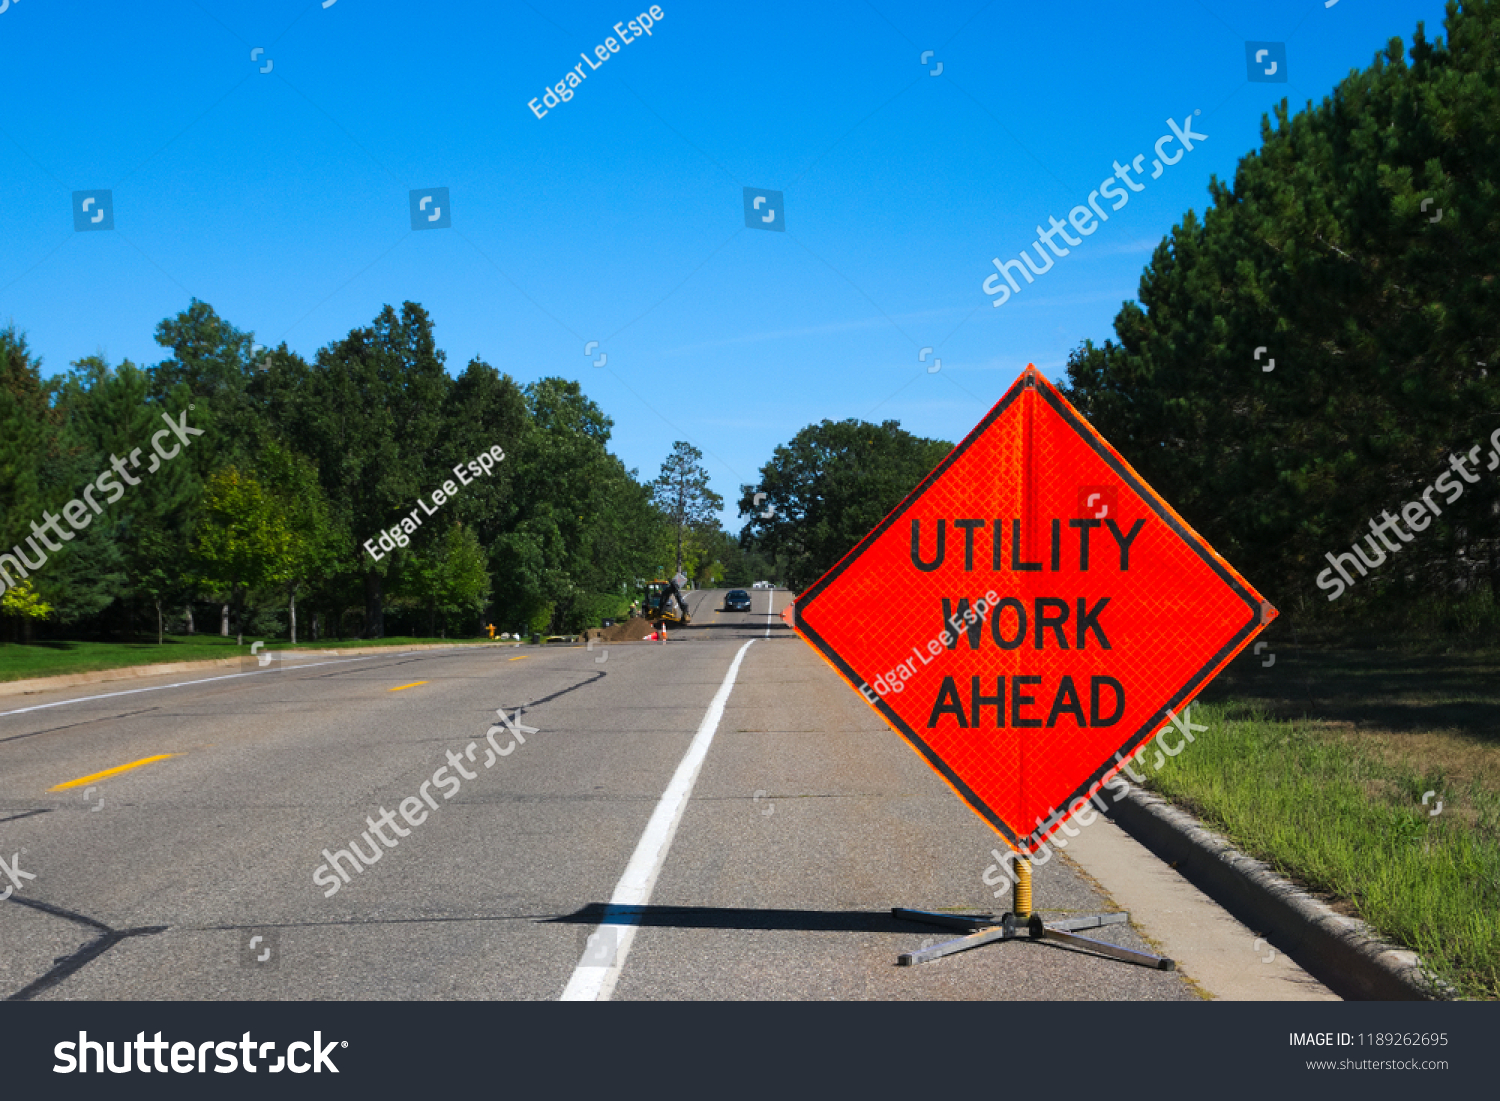 Utility Work Ahead sign with service vehicle down the street #1189262695